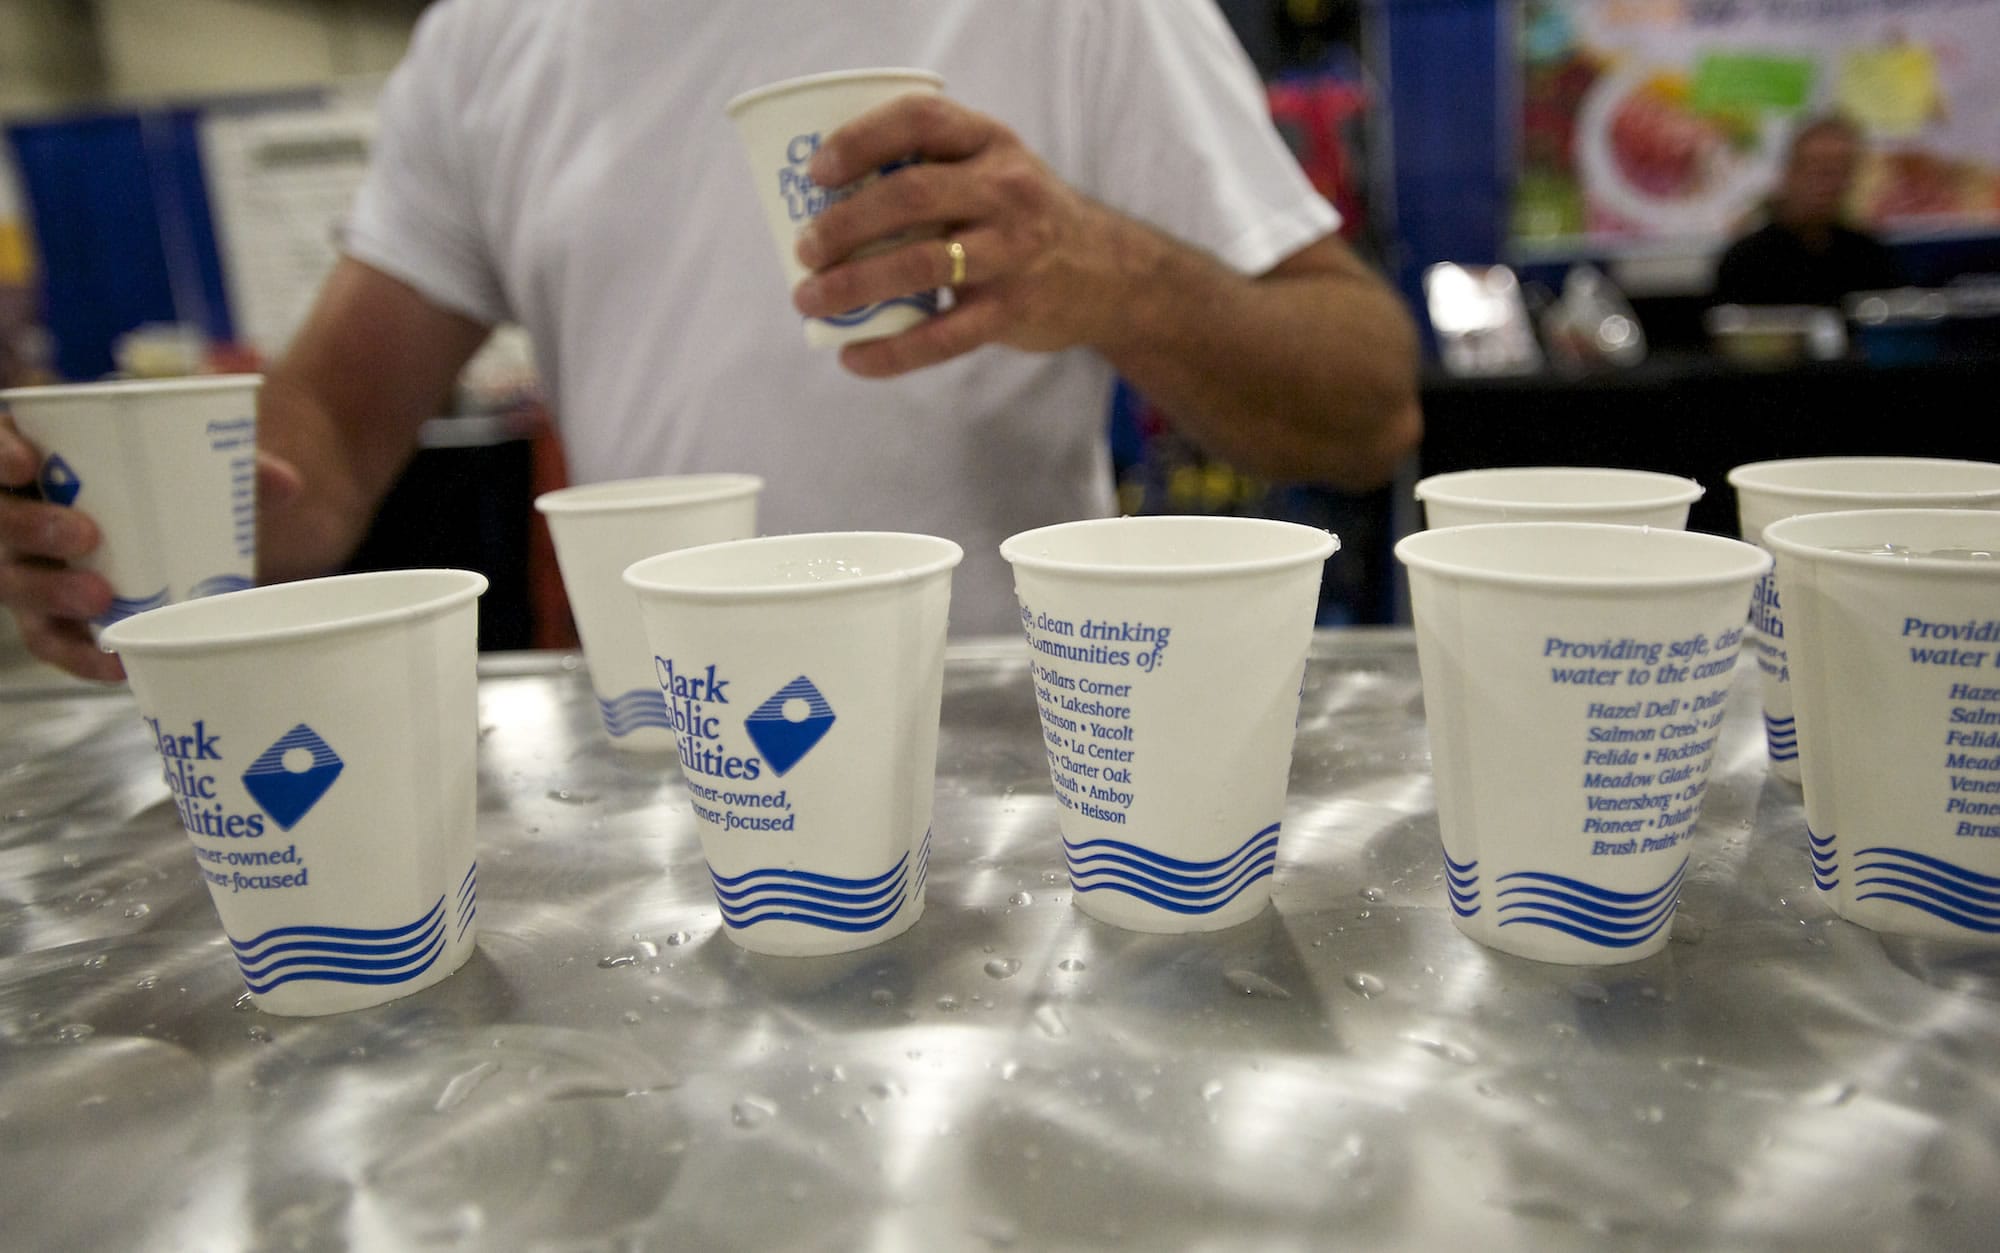 A fairgoer grabs ice water courtesy of Clark Public Utilities at the Clark County Fair on Monday.